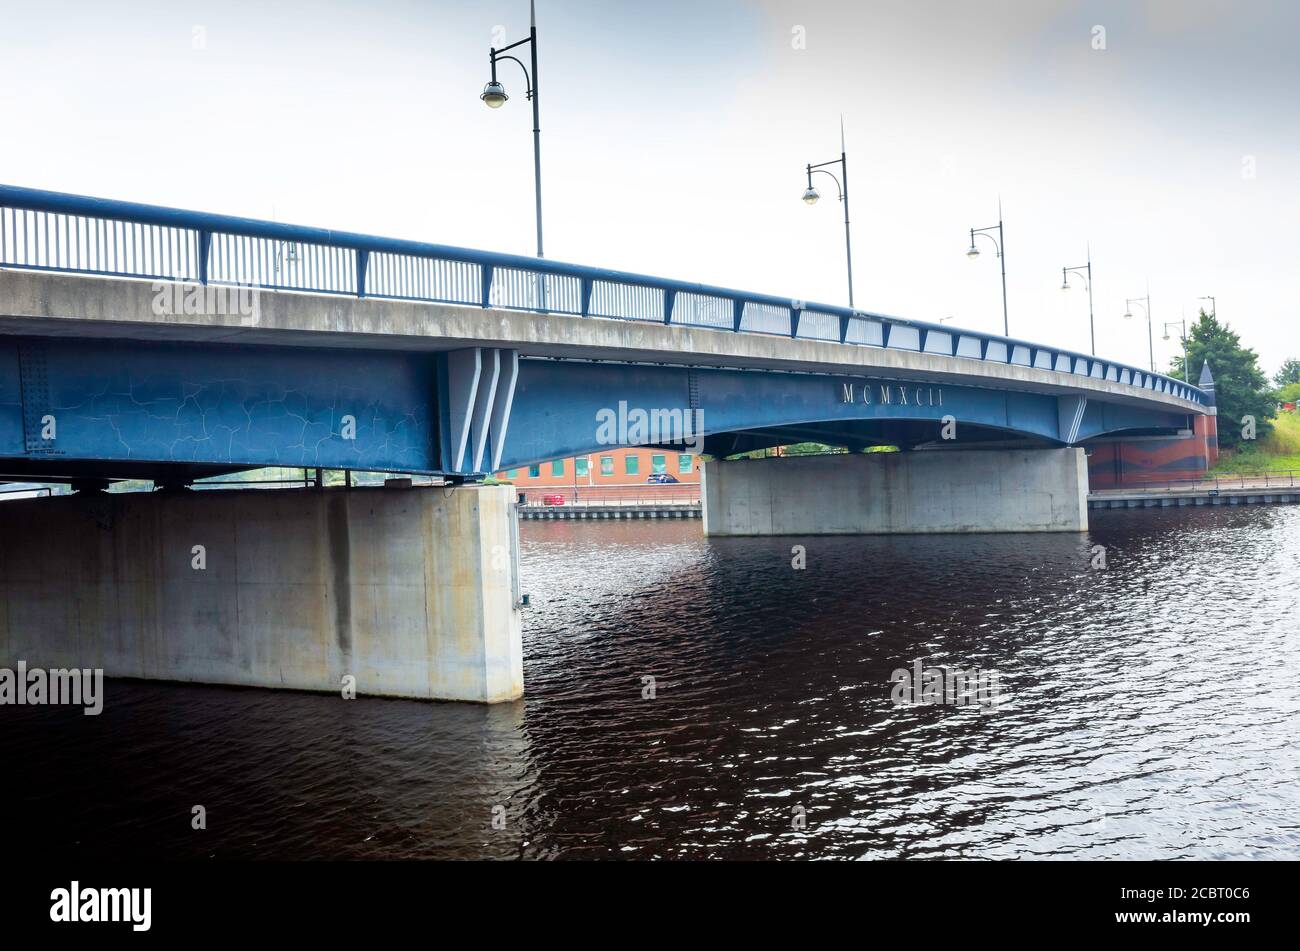 Princess of Wales Bridge is a dual carriageway road bridge carrying the Teesdale Boulevard across the River Tees in Stockton-on-Tees in the Northeast Stock Photo